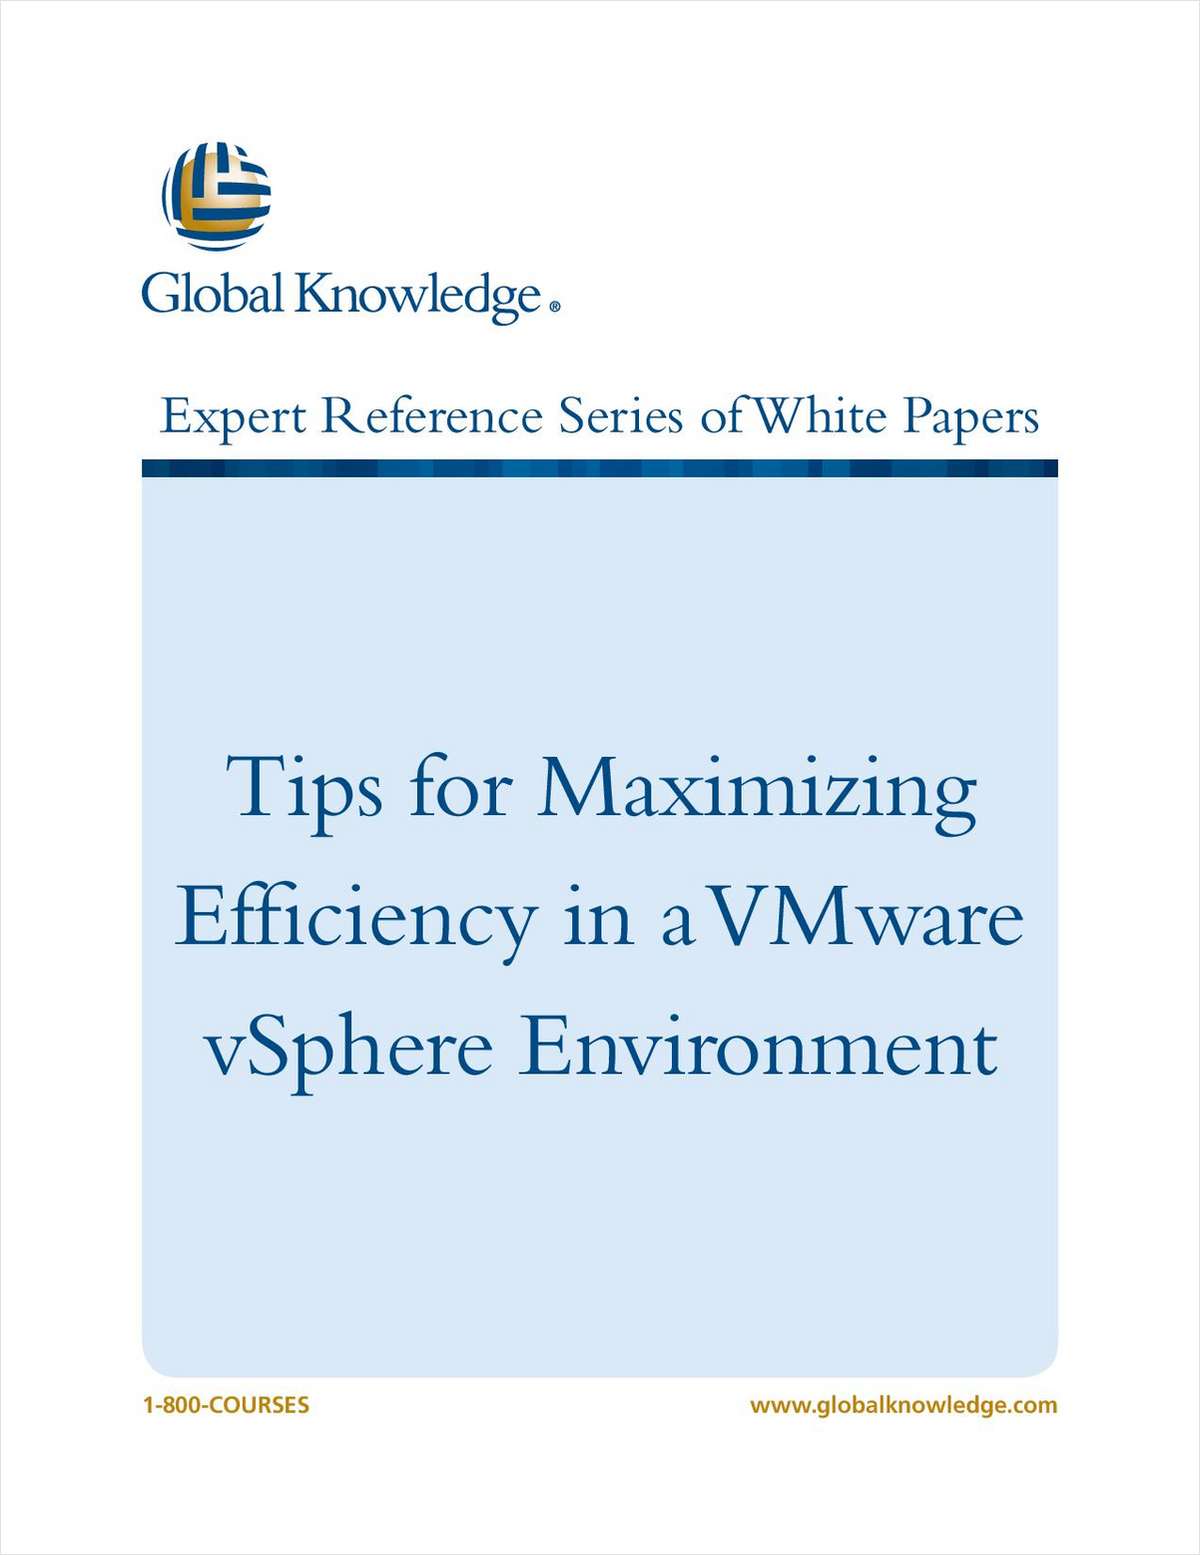 Tips for Maximizing Efficiency in a VMware vSphere Environment